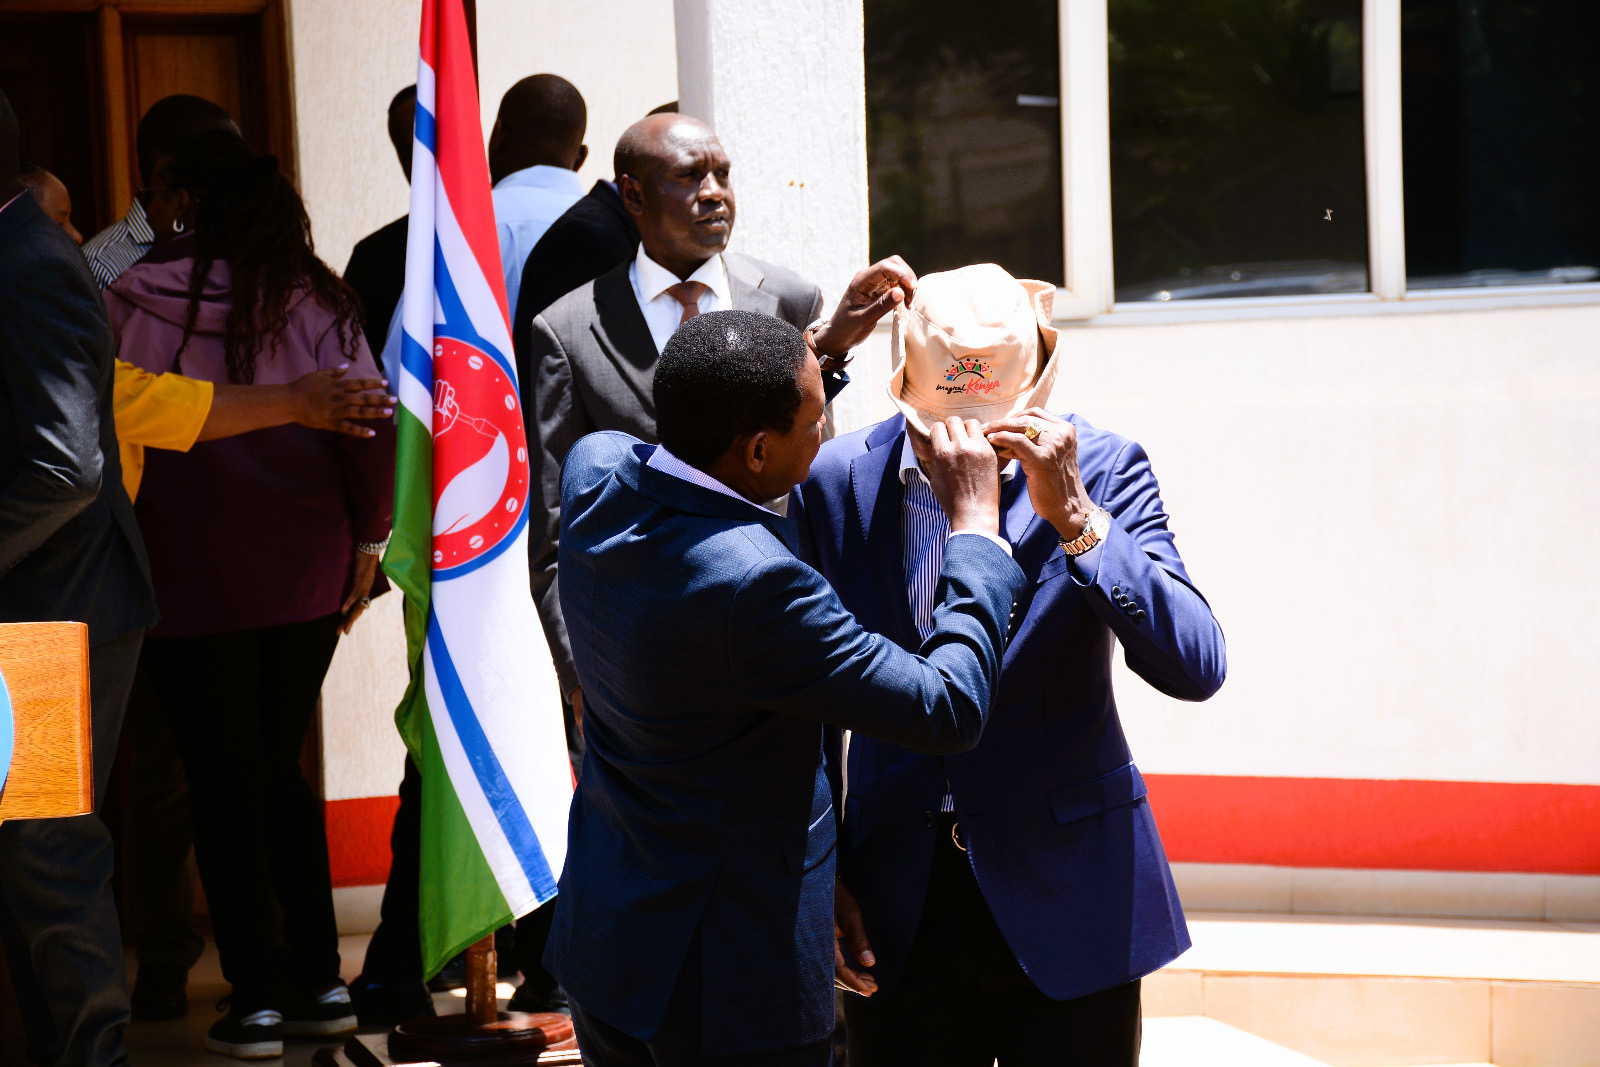 The Cabinet Secretary, Ministry of Tourism and Wildlife, Dr. Alfred Mutua (left), gifting the Kiambu County Governor, H.E. Dr. Paul Wamatangi (right).